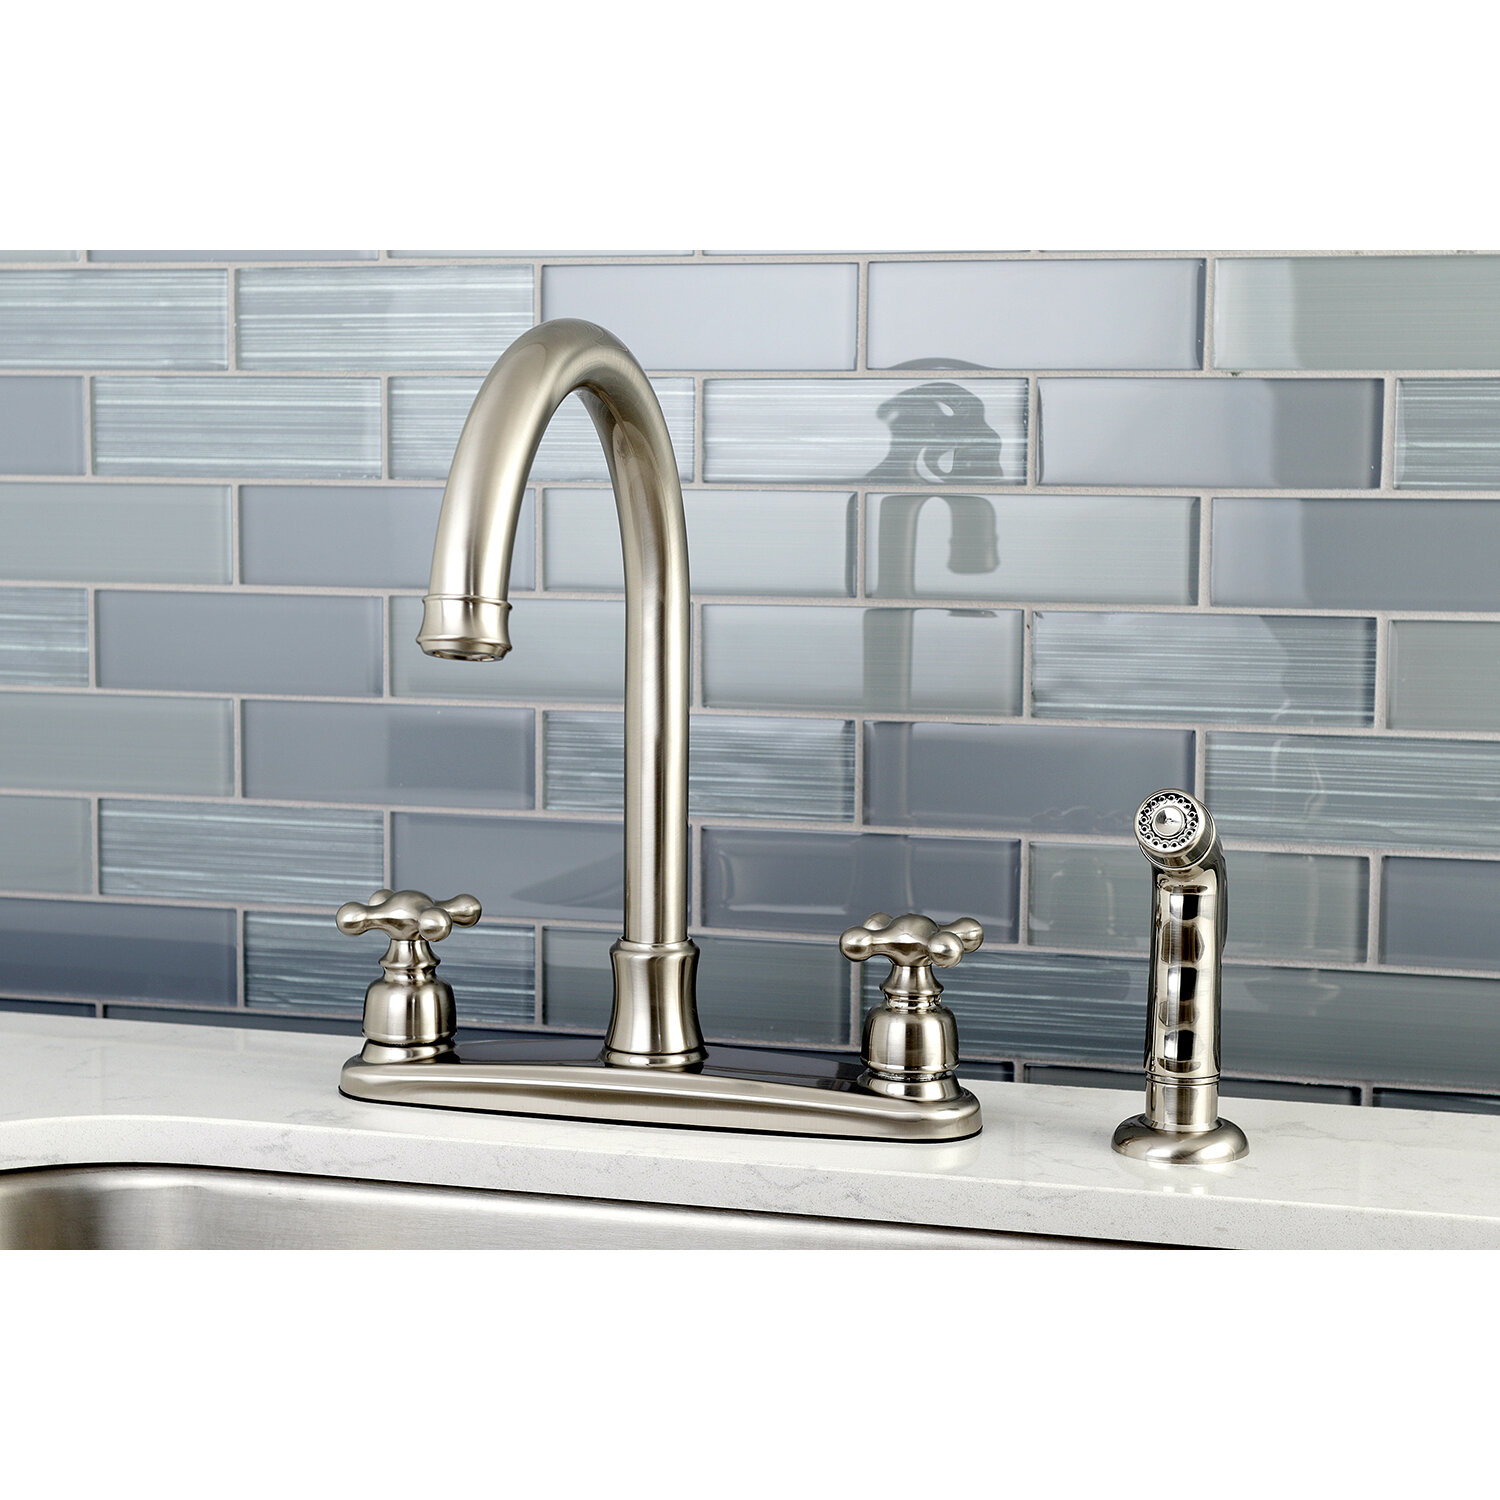 Kingston Brass Victorian Double Handle Kitchen Faucet With Side Spray Reviews Wayfair